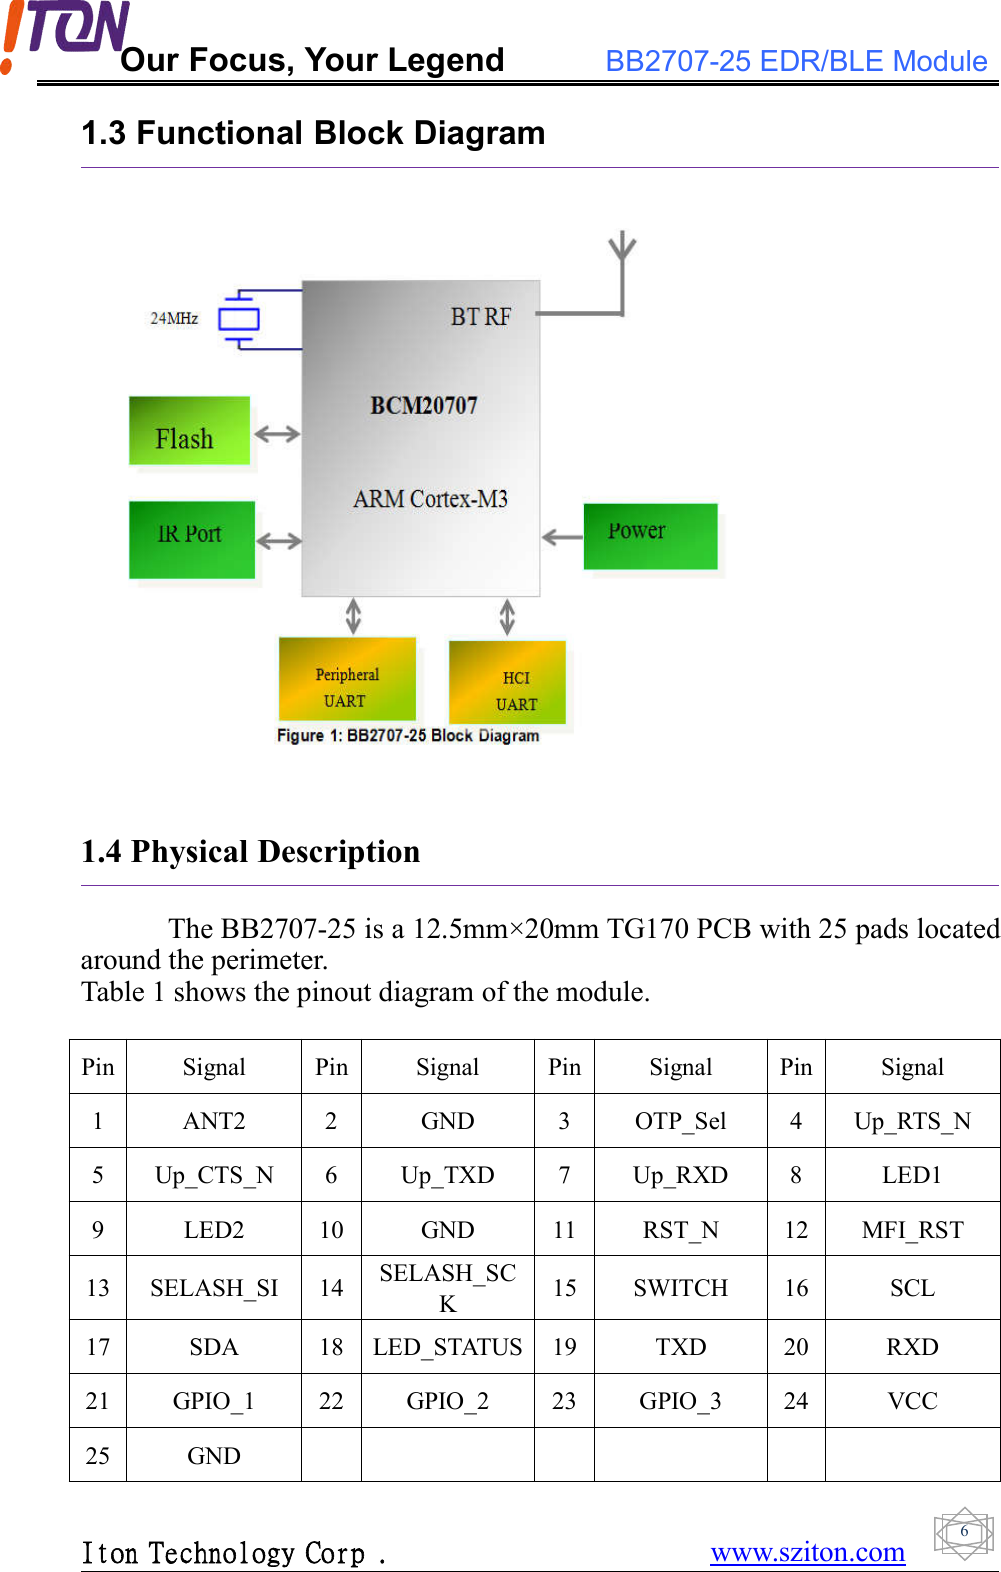 Our Focus, Your Legend BB2707-25 EDR/BLE ModuleIton Technology Corp . www.sziton.com61.3 Functional Block Diagram1.4 Physical DescriptionThe BB2707-25 is a 12.5mm×20mm TG170 PCB with 25 pads locatedaround the perimeter.Table 1 shows the pinout diagram of the module.Pin Signal Pin Signal Pin Signal Pin Signal1 ANT2 2 GND 3 OTP_Sel 4 Up_RTS_N5 Up_CTS_N 6 Up_TXD 7 Up_RXD 8 LED19 LED2 10 GND 11 RST_N 12 MFI_RST13 SELASH_SI 14 SELASH_SCK15 SWITCH 16 SCL17 SDA 18 LED_STATUS 19 TXD 20 RXD21 GPIO_1 22 GPIO_2 23 GPIO_3 24 VCC25 GND